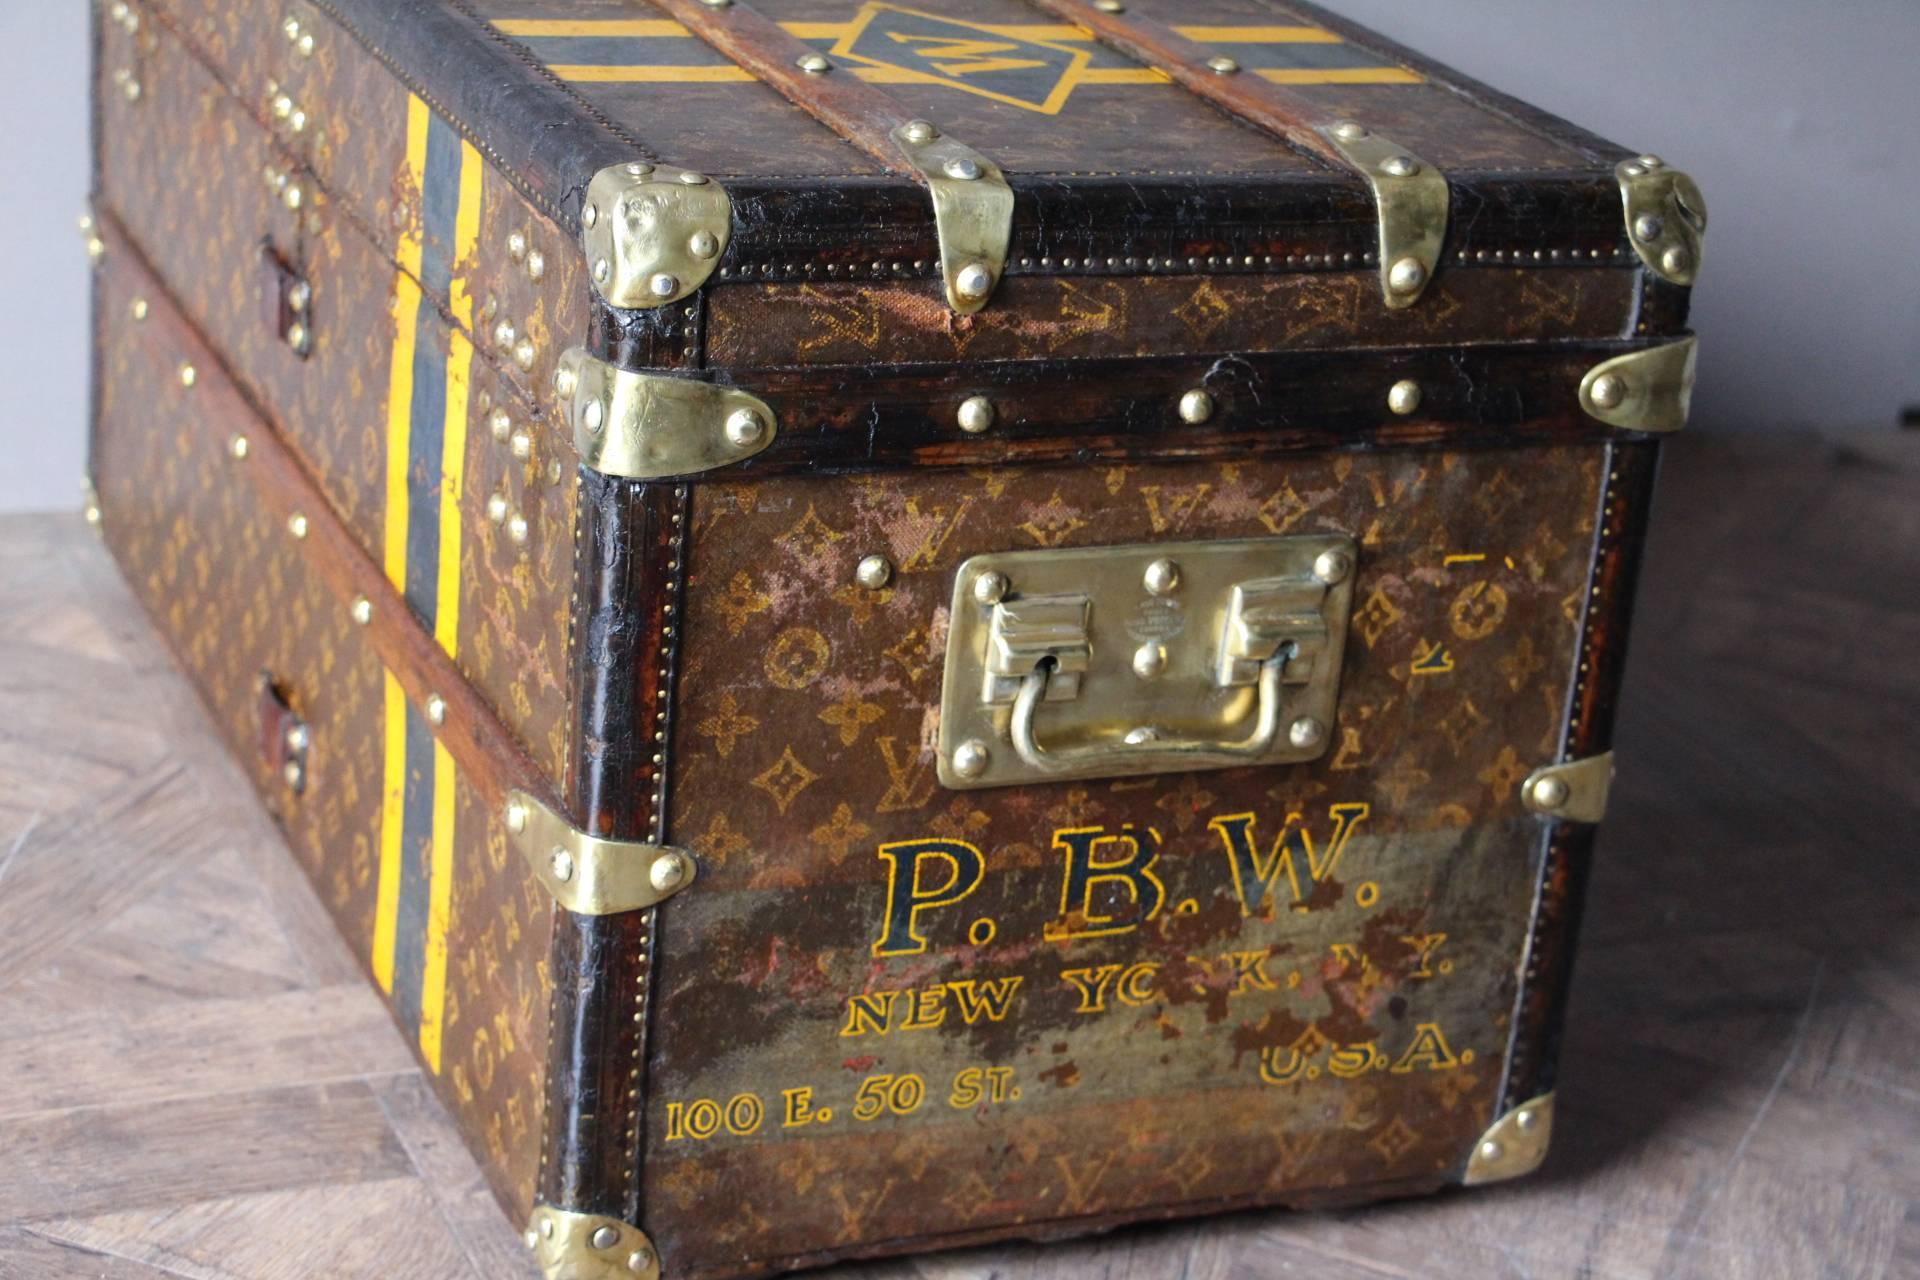 This small Louis Vuitton trunk features monogram canvas, leather trim, brass corners and all LV stamped brass studs, locks and side handles.
Beautiful patina and very charming and unusual proportions.
Its interior is all original too in red and